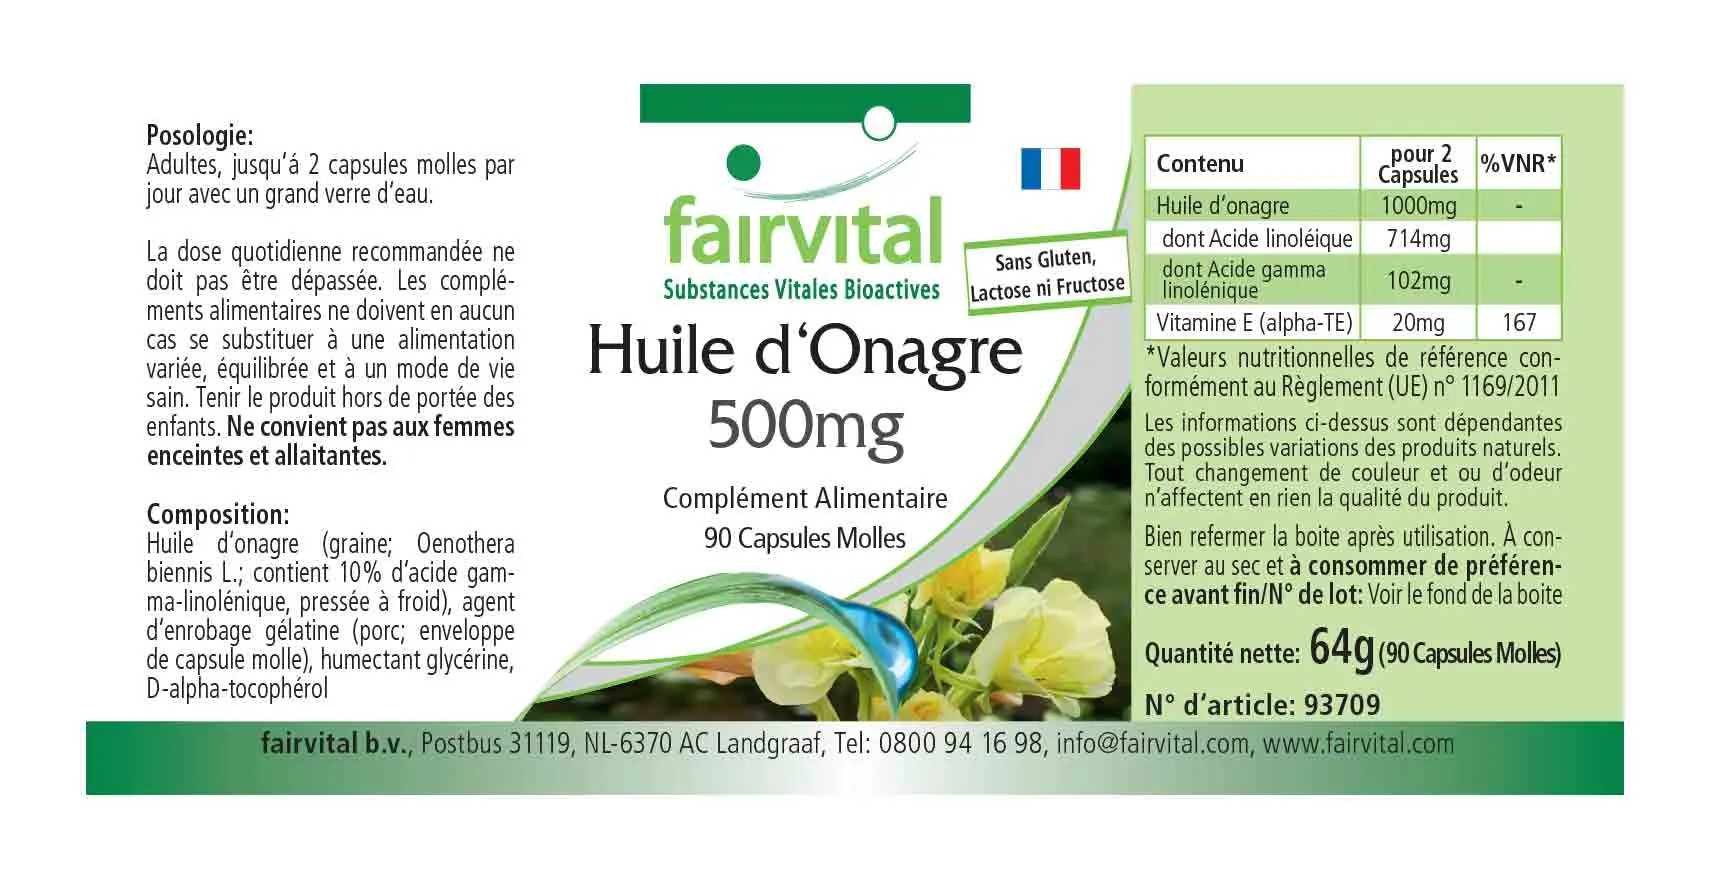 Huile d'onagre 500mg - 90 capsules molles